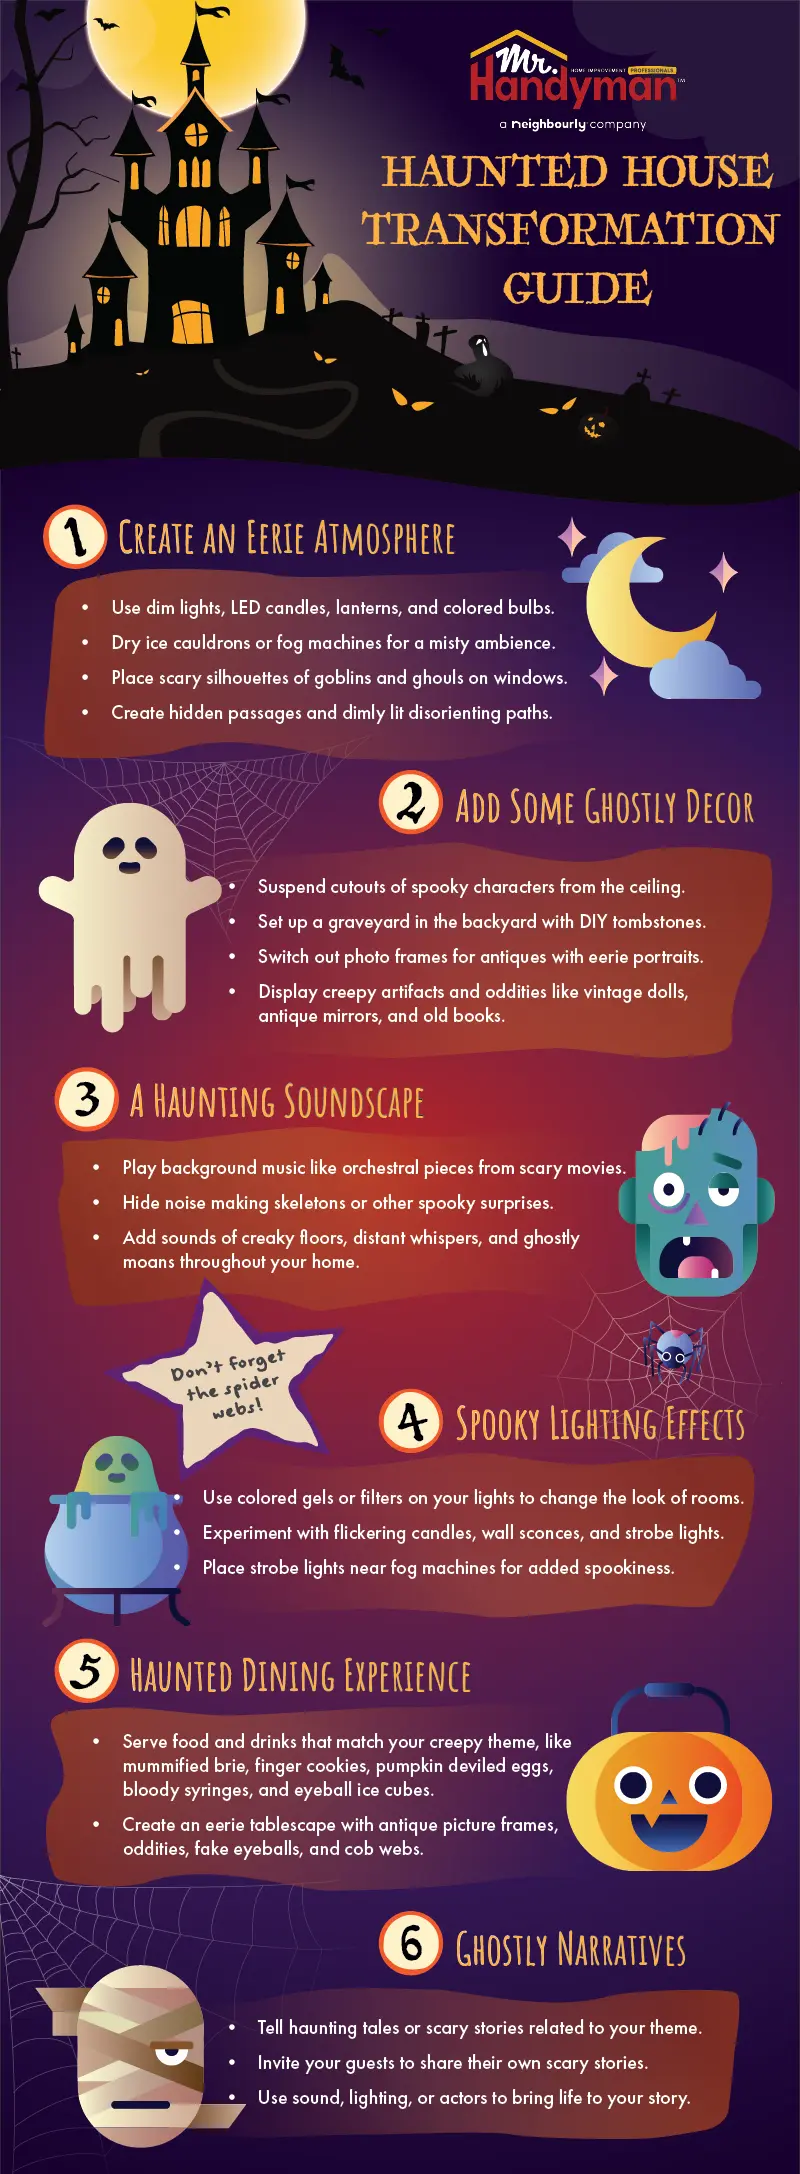 How to Turn Your Home into a Haunted House